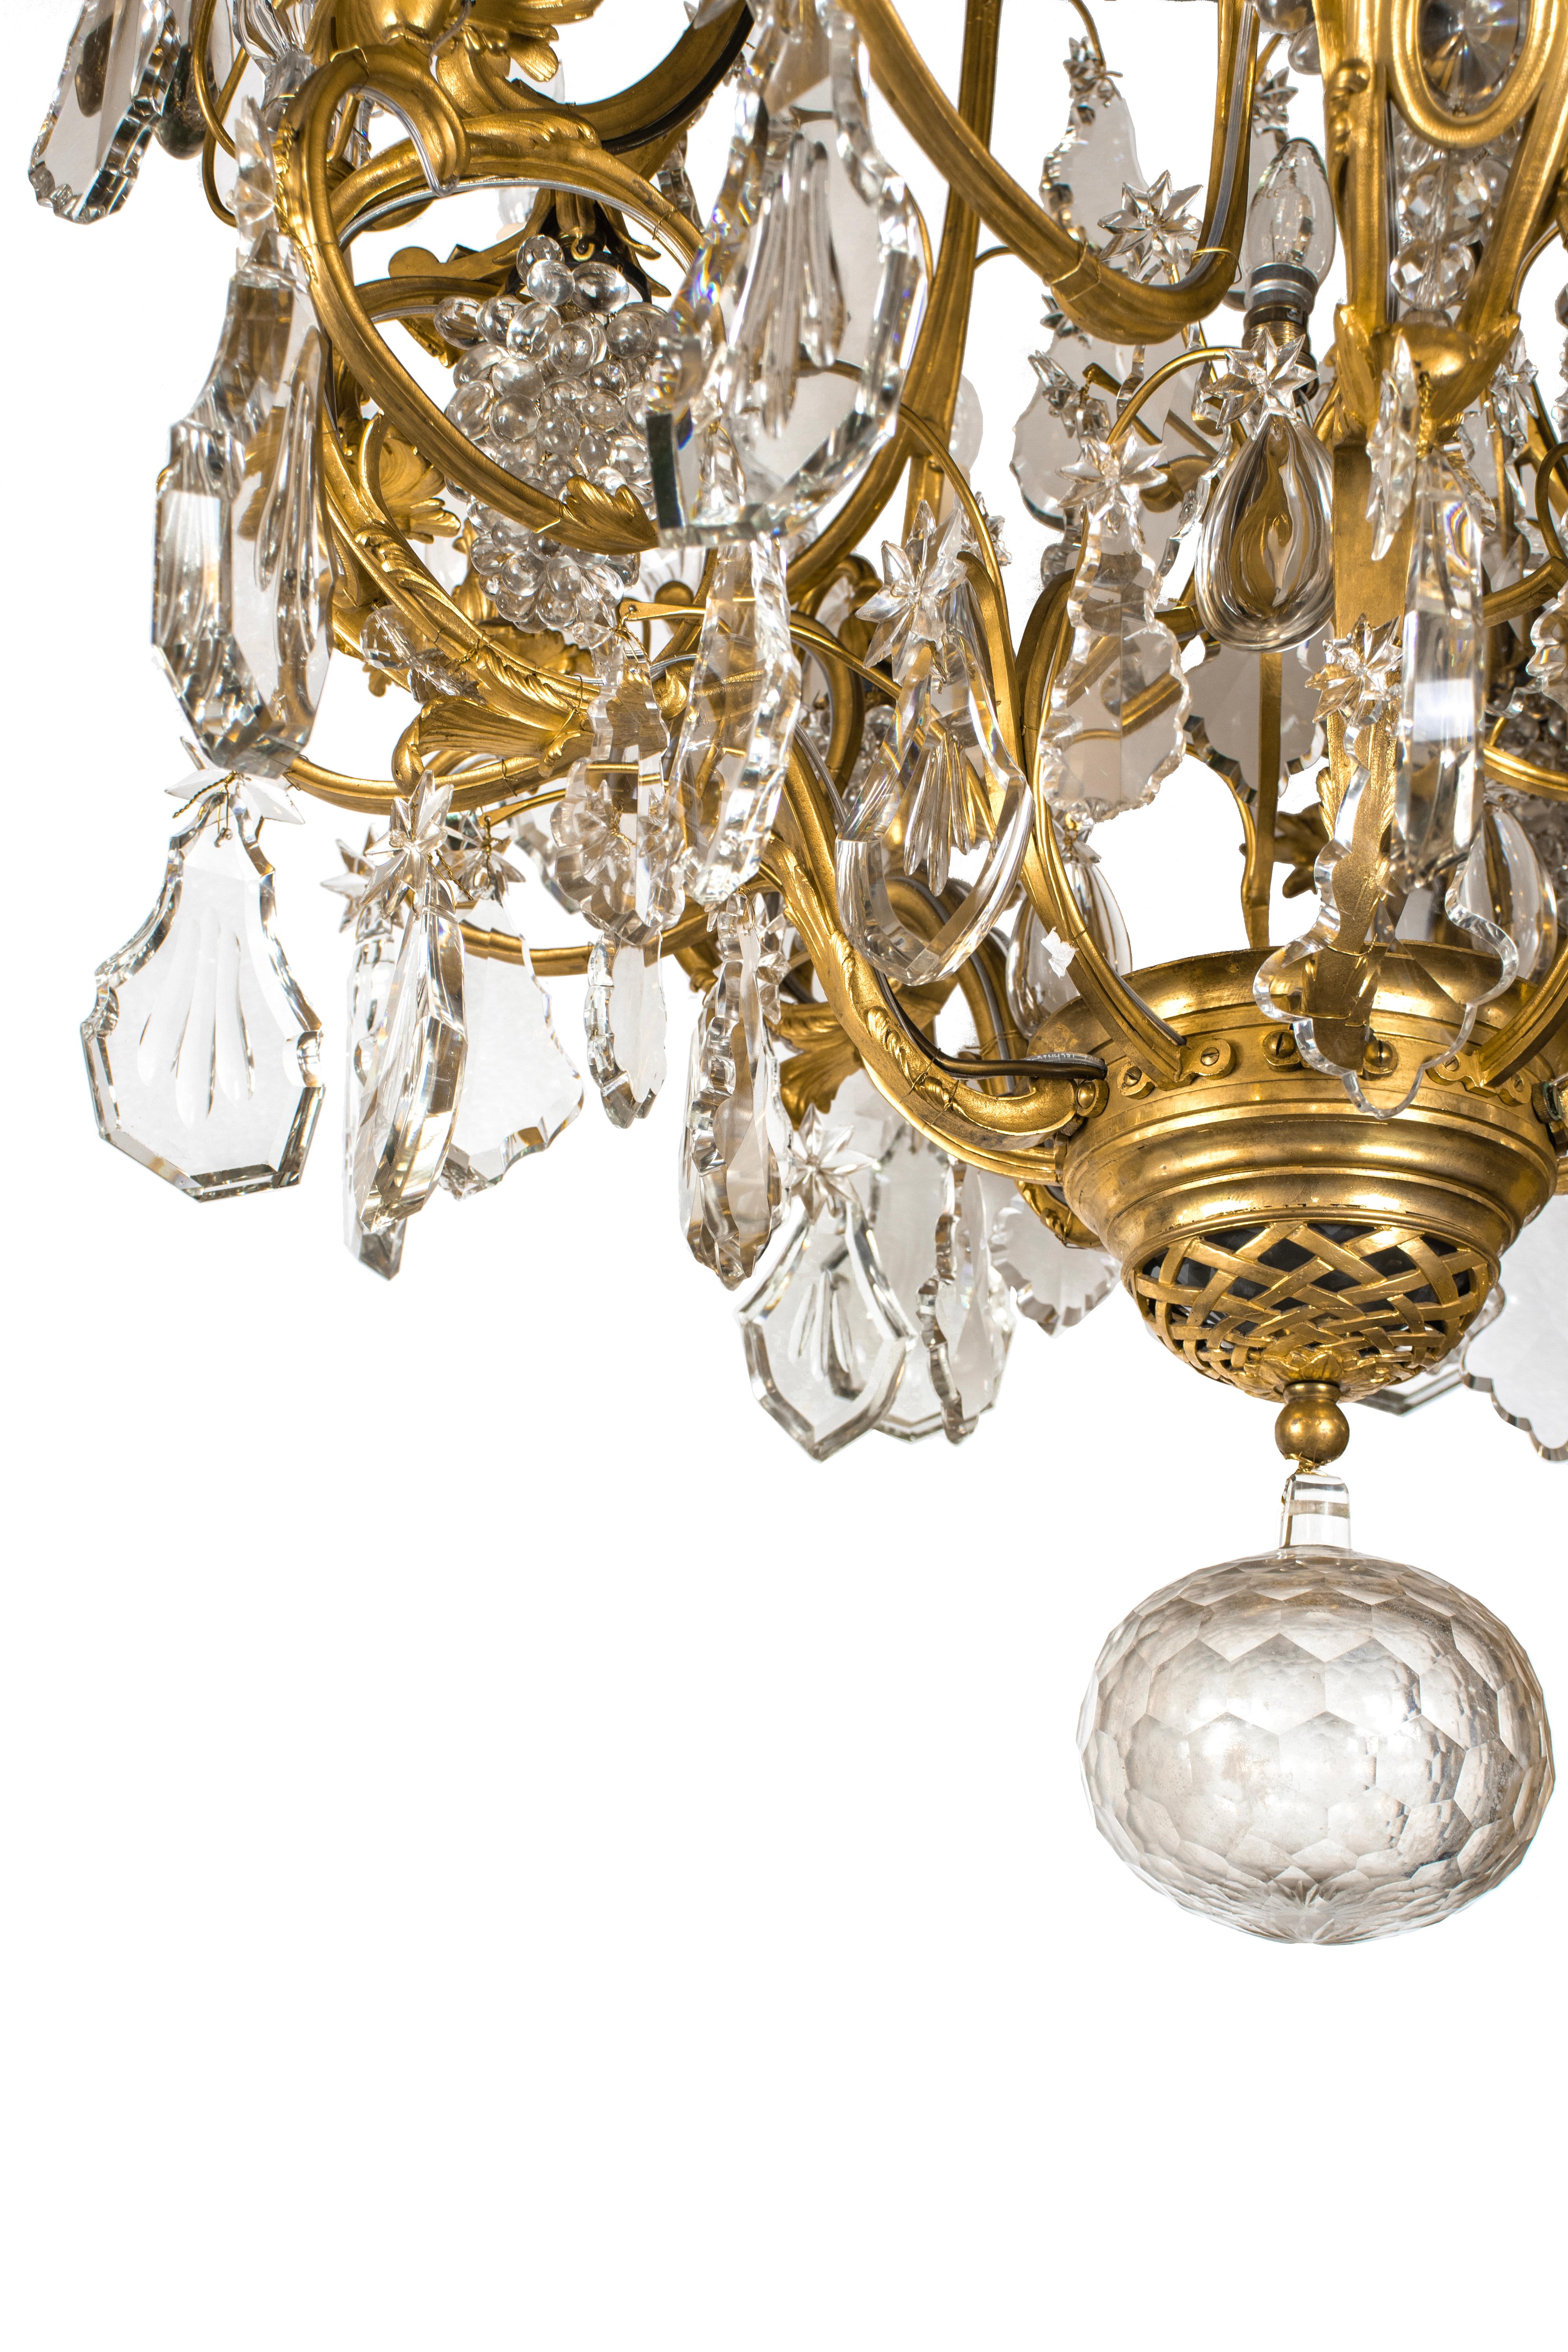 A large ormolu chandelier of Louis XV style with 10 lights on scrolling branches and one additional light bulb in the center. Decorated with oversized crystals of various shapes: stars, drops, rosettes, cones, curved prisms, and bunches of grapes.